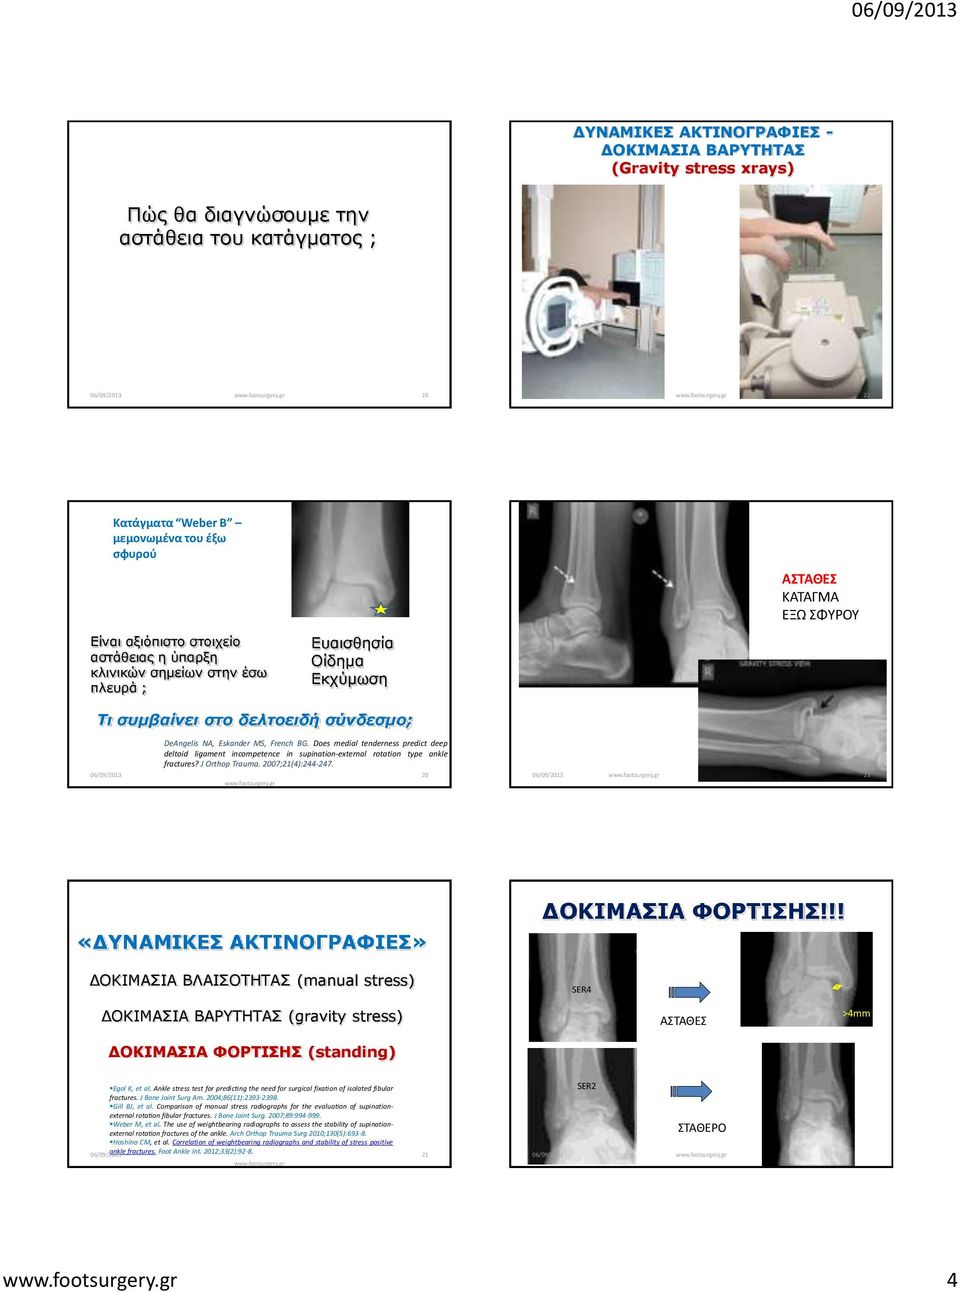 Does medial tenderness predict deep deltoid ligament incompetence in supination-external rotation type ankle fractures? J Orthop Trauma. 2007;21(4):244-247.